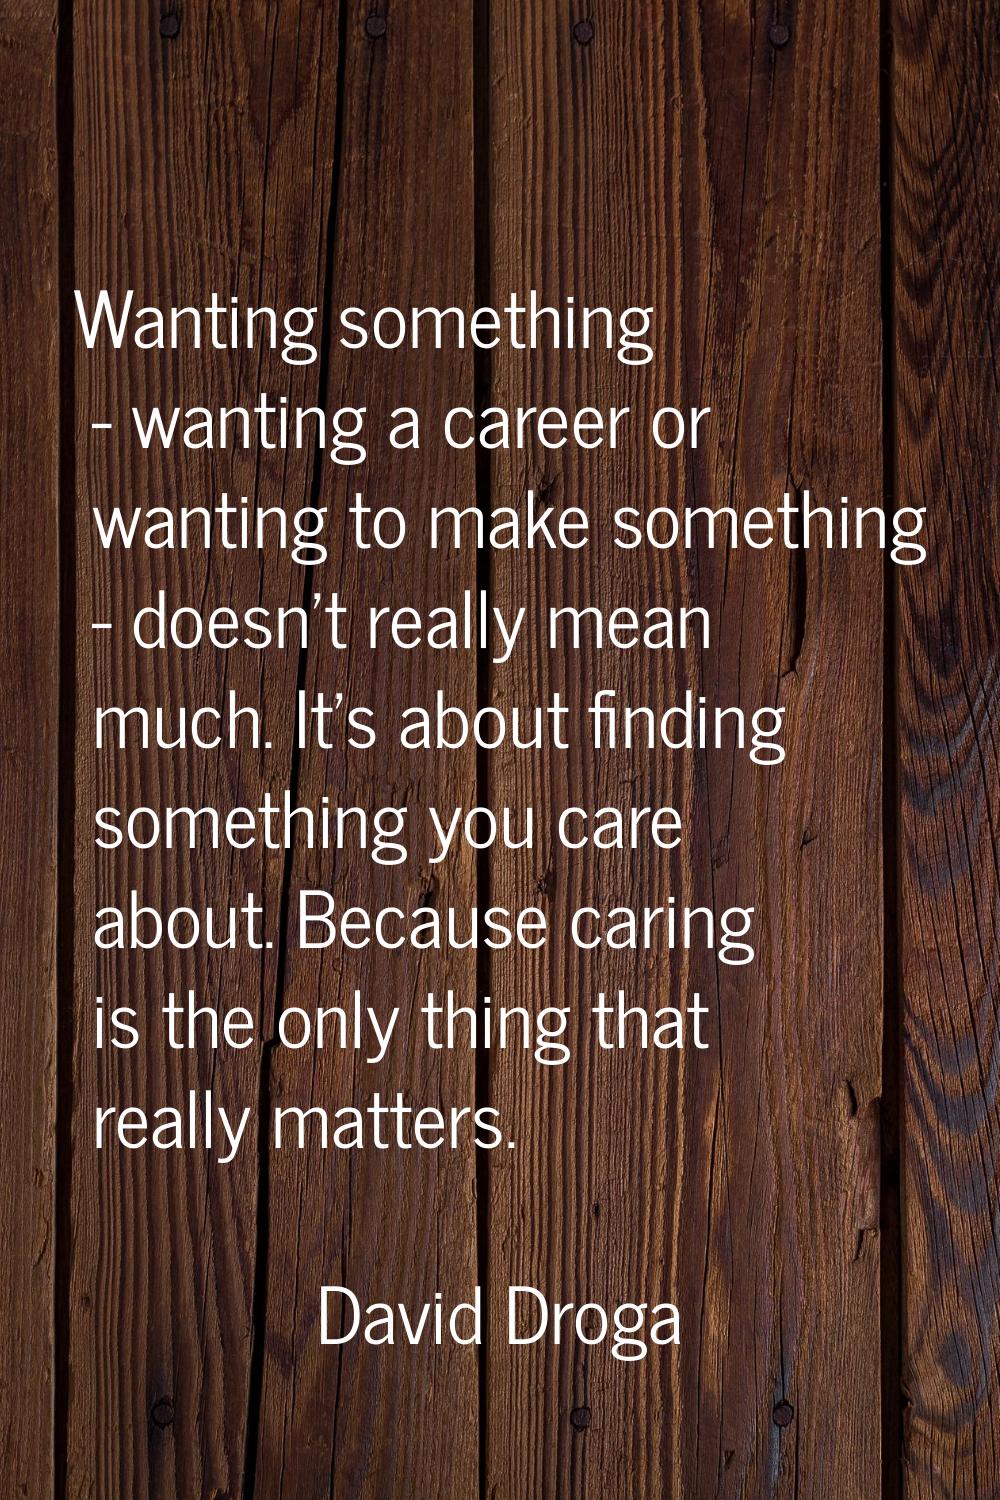 Wanting something - wanting a career or wanting to make something - doesn't really mean much. It's 